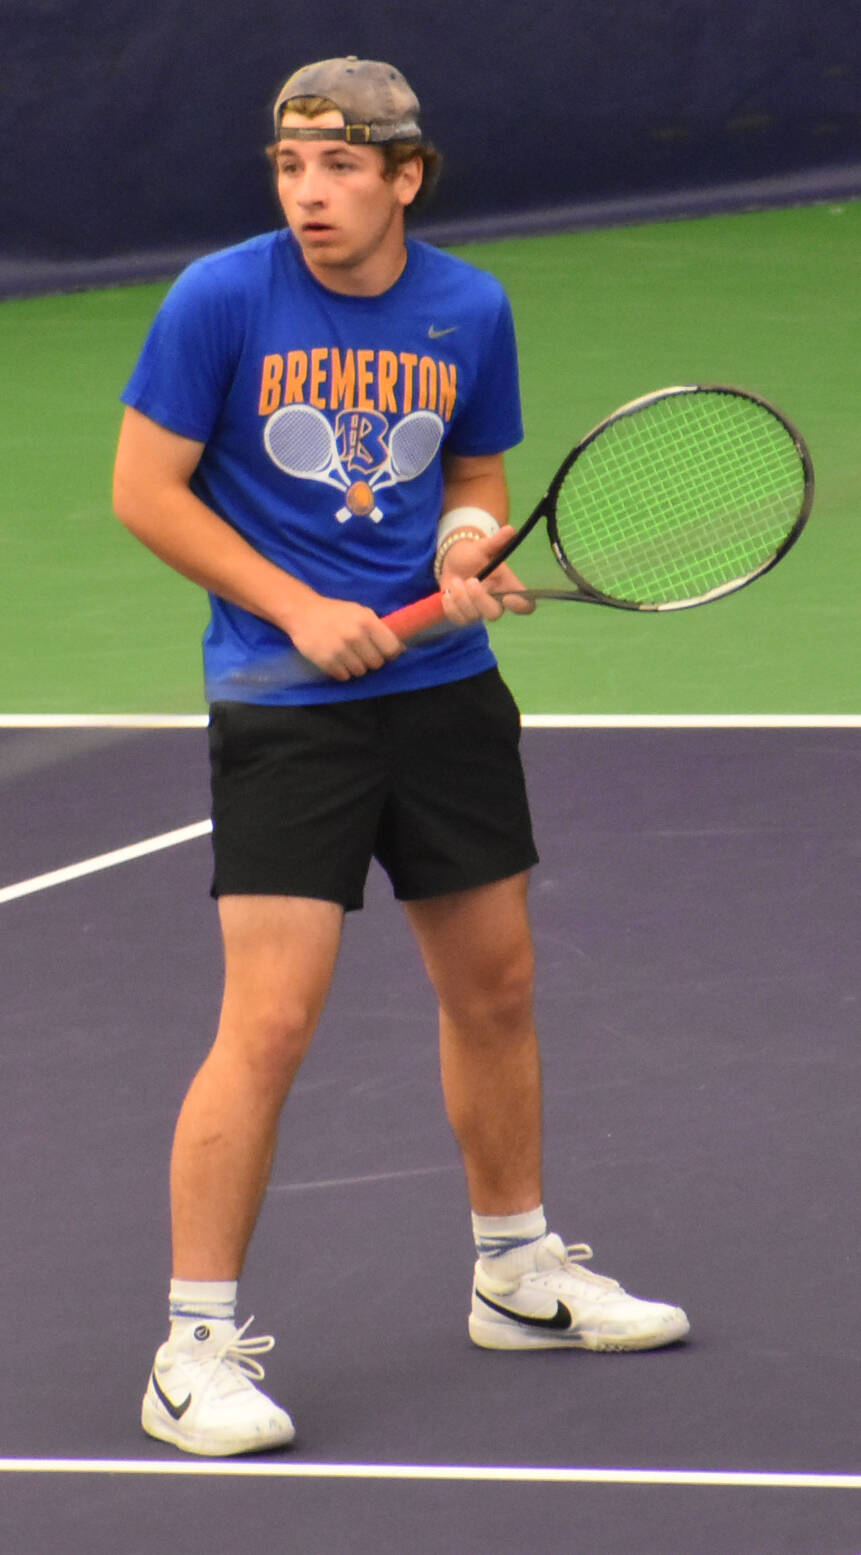 Bremerton’s doubles team of Jackson Warner and Nicho Crowley-Koehler finishes sixth as well.